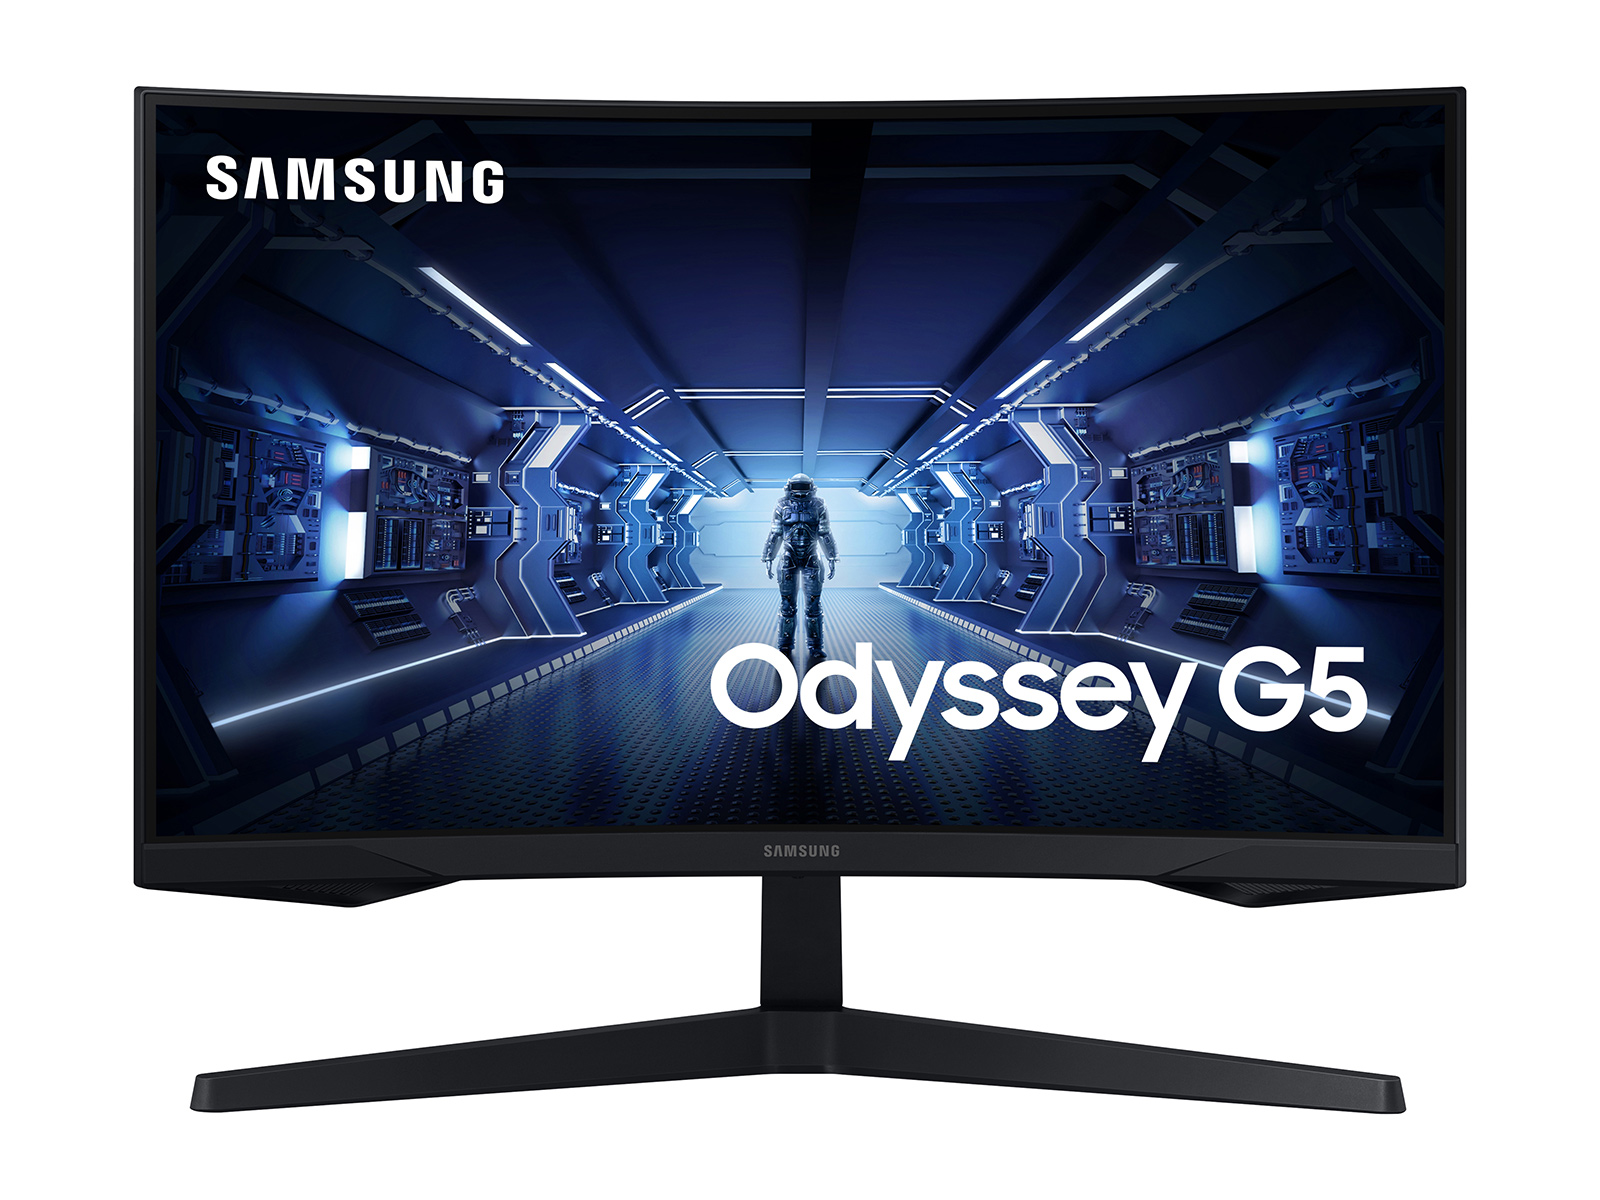 Samsung 27 G5 Odyssey Gaming Monitor With 1000r Curved Screen In Black Lc27g55tqwnxza From Samsung Fandom Shop - samsung curved tv roblox